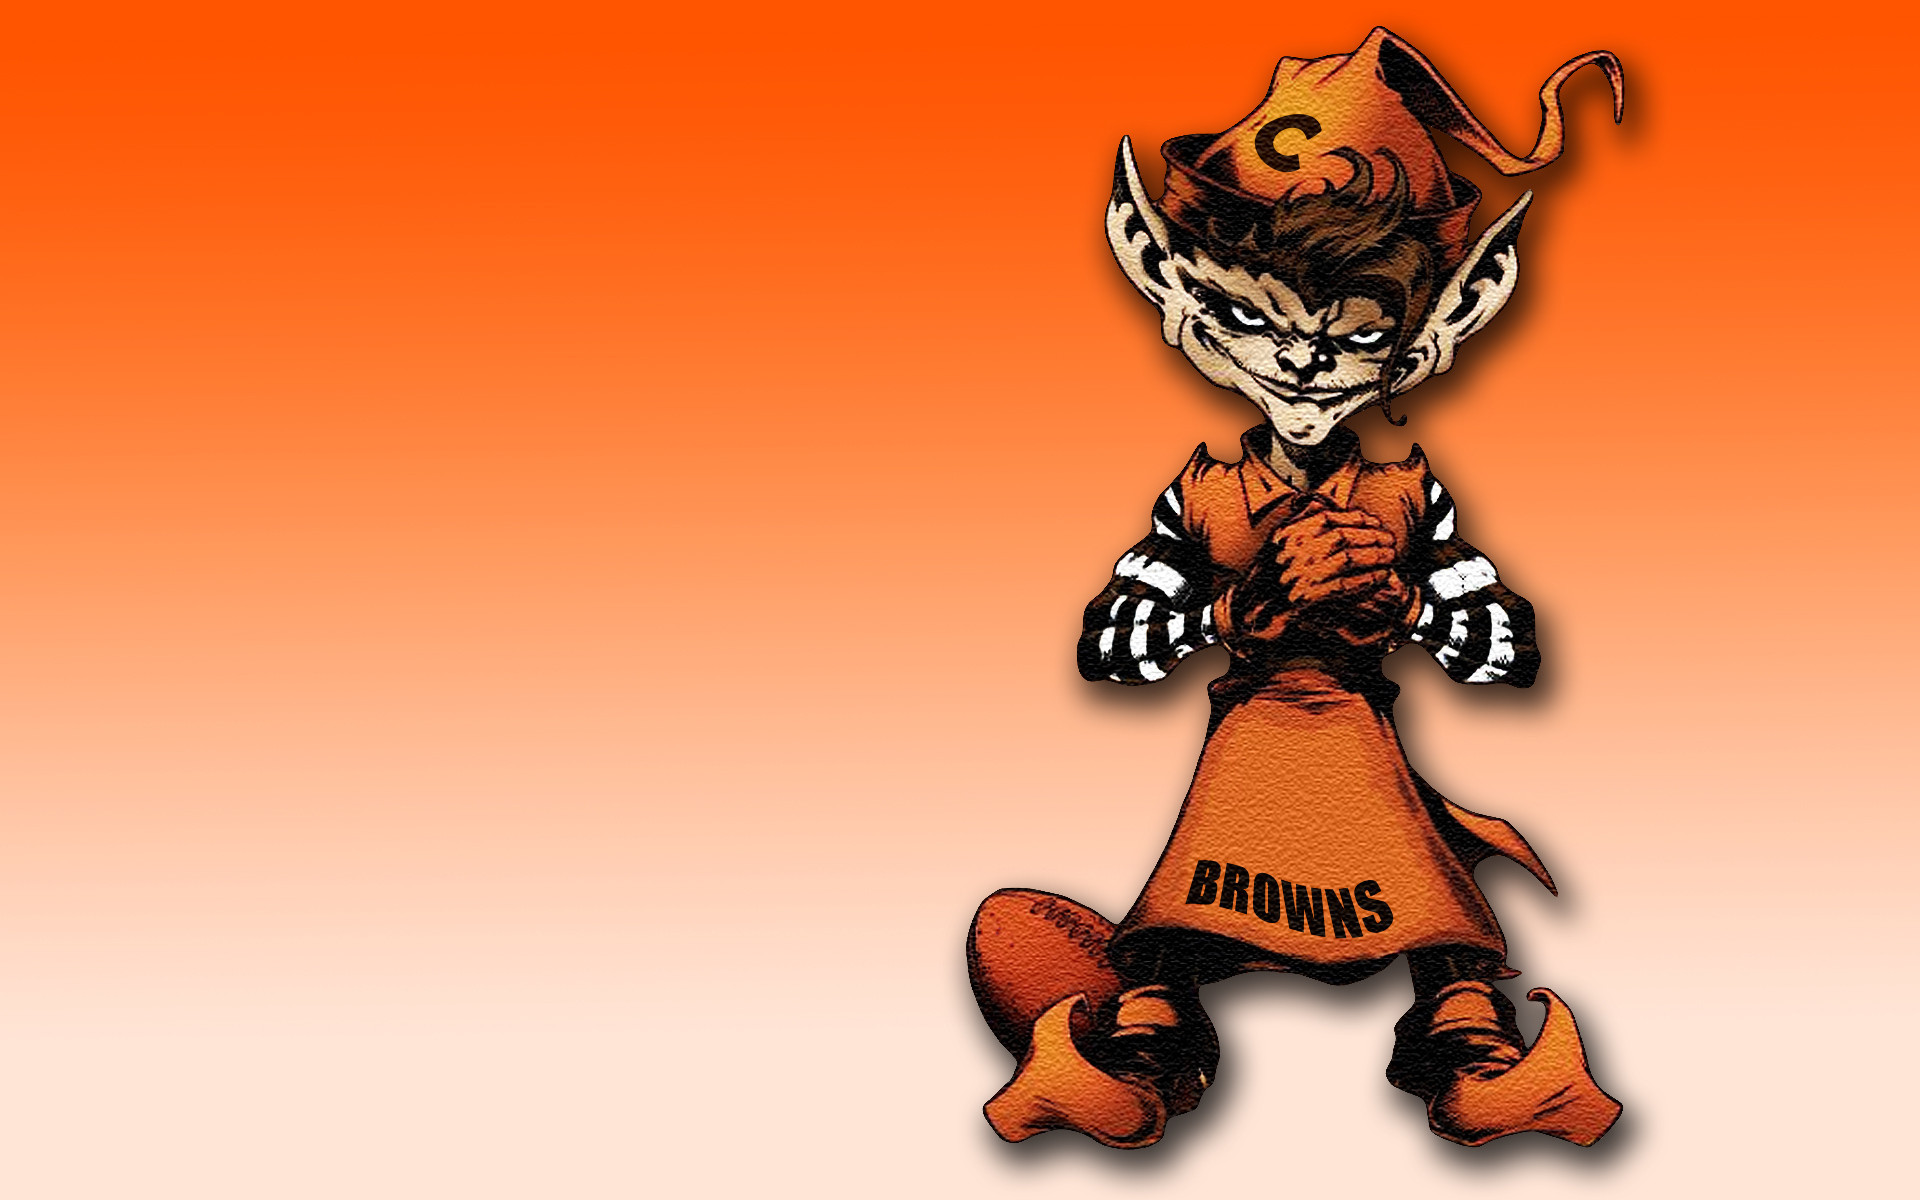 1920x1200, Cleveland Browns Wallpapers - Logos And Uniforms Of The Cleveland Browns - HD Wallpaper 